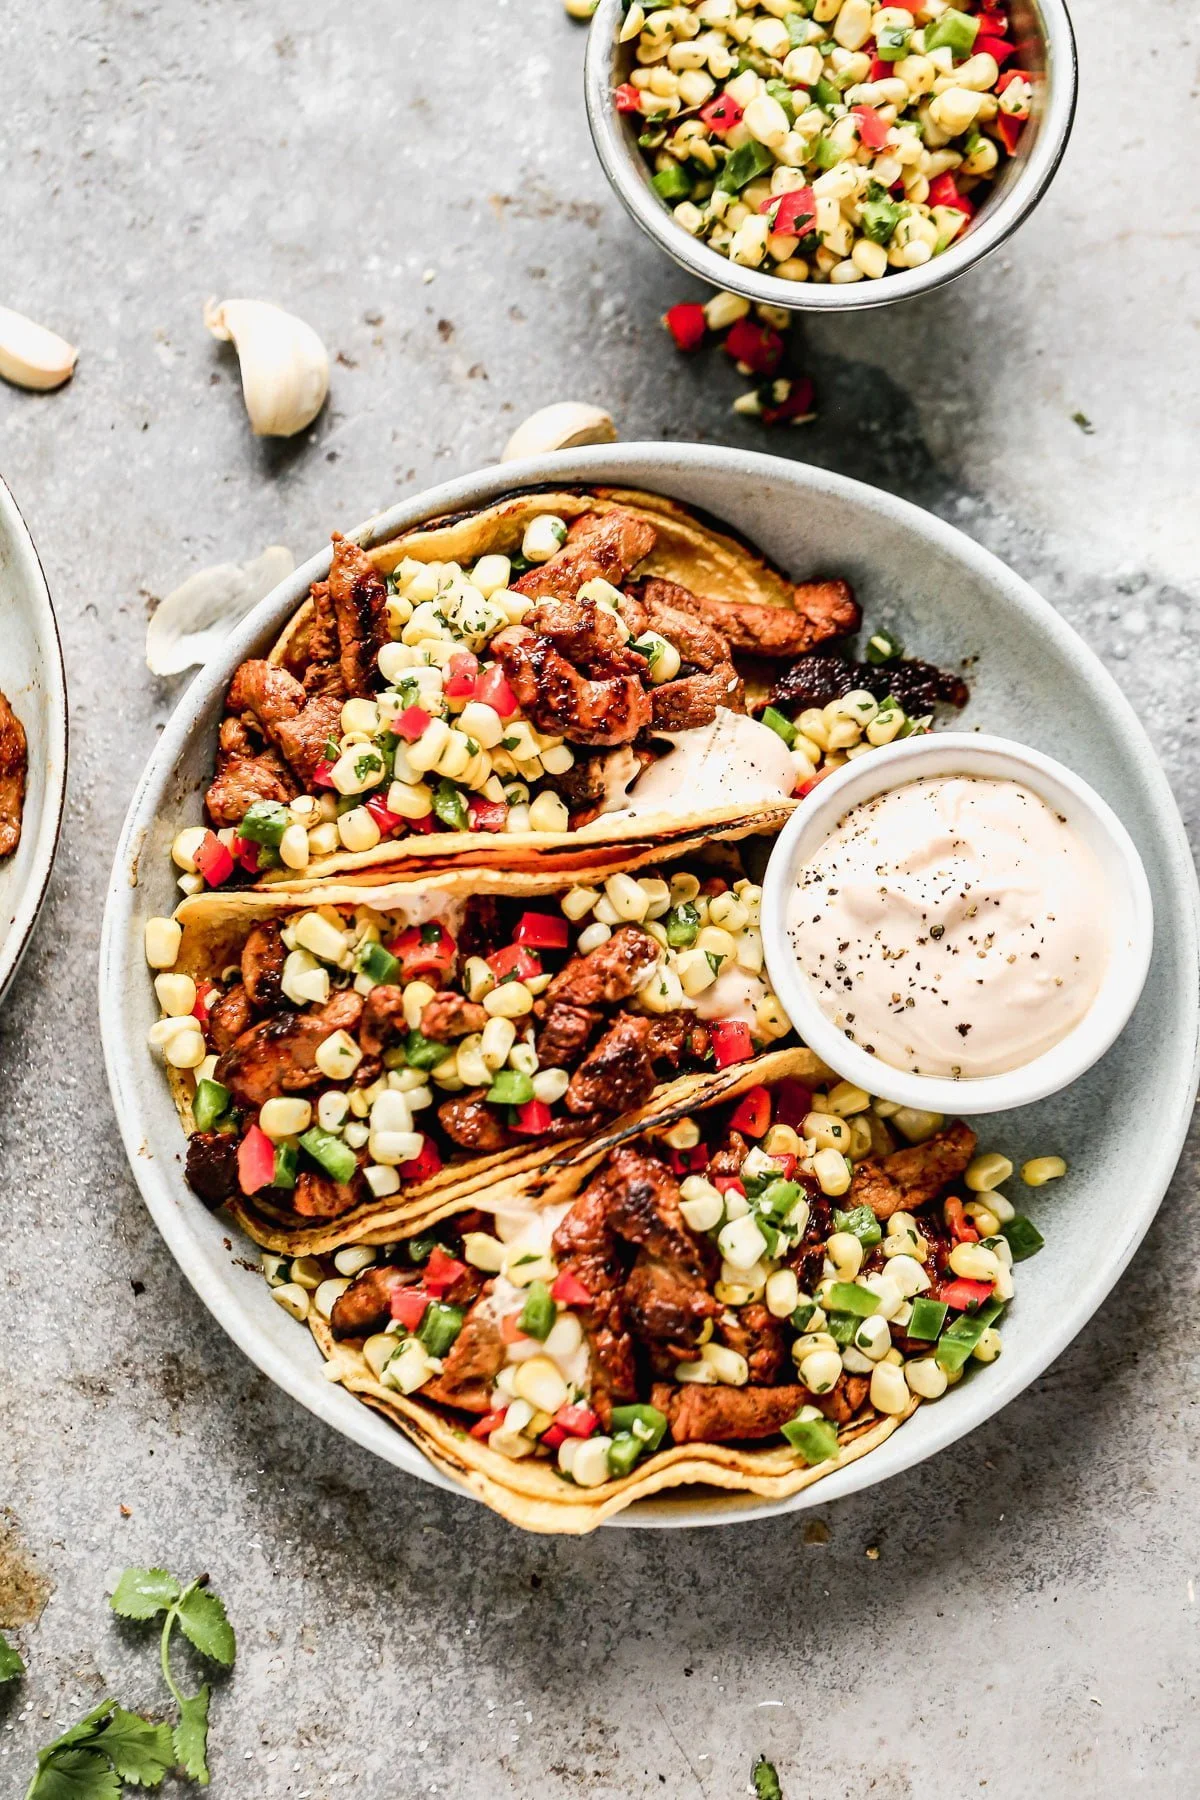 Pork Tenderloin Tacos. We flavor lean pork tenderloin in an easy soy sauce and lime marinade, crisp it up in a cast-iron skillet and then nestle it into charred corn tortillas with an easy corn salsa and zippy lime crema. Healthy, easy and so satisfying.&nbsp;